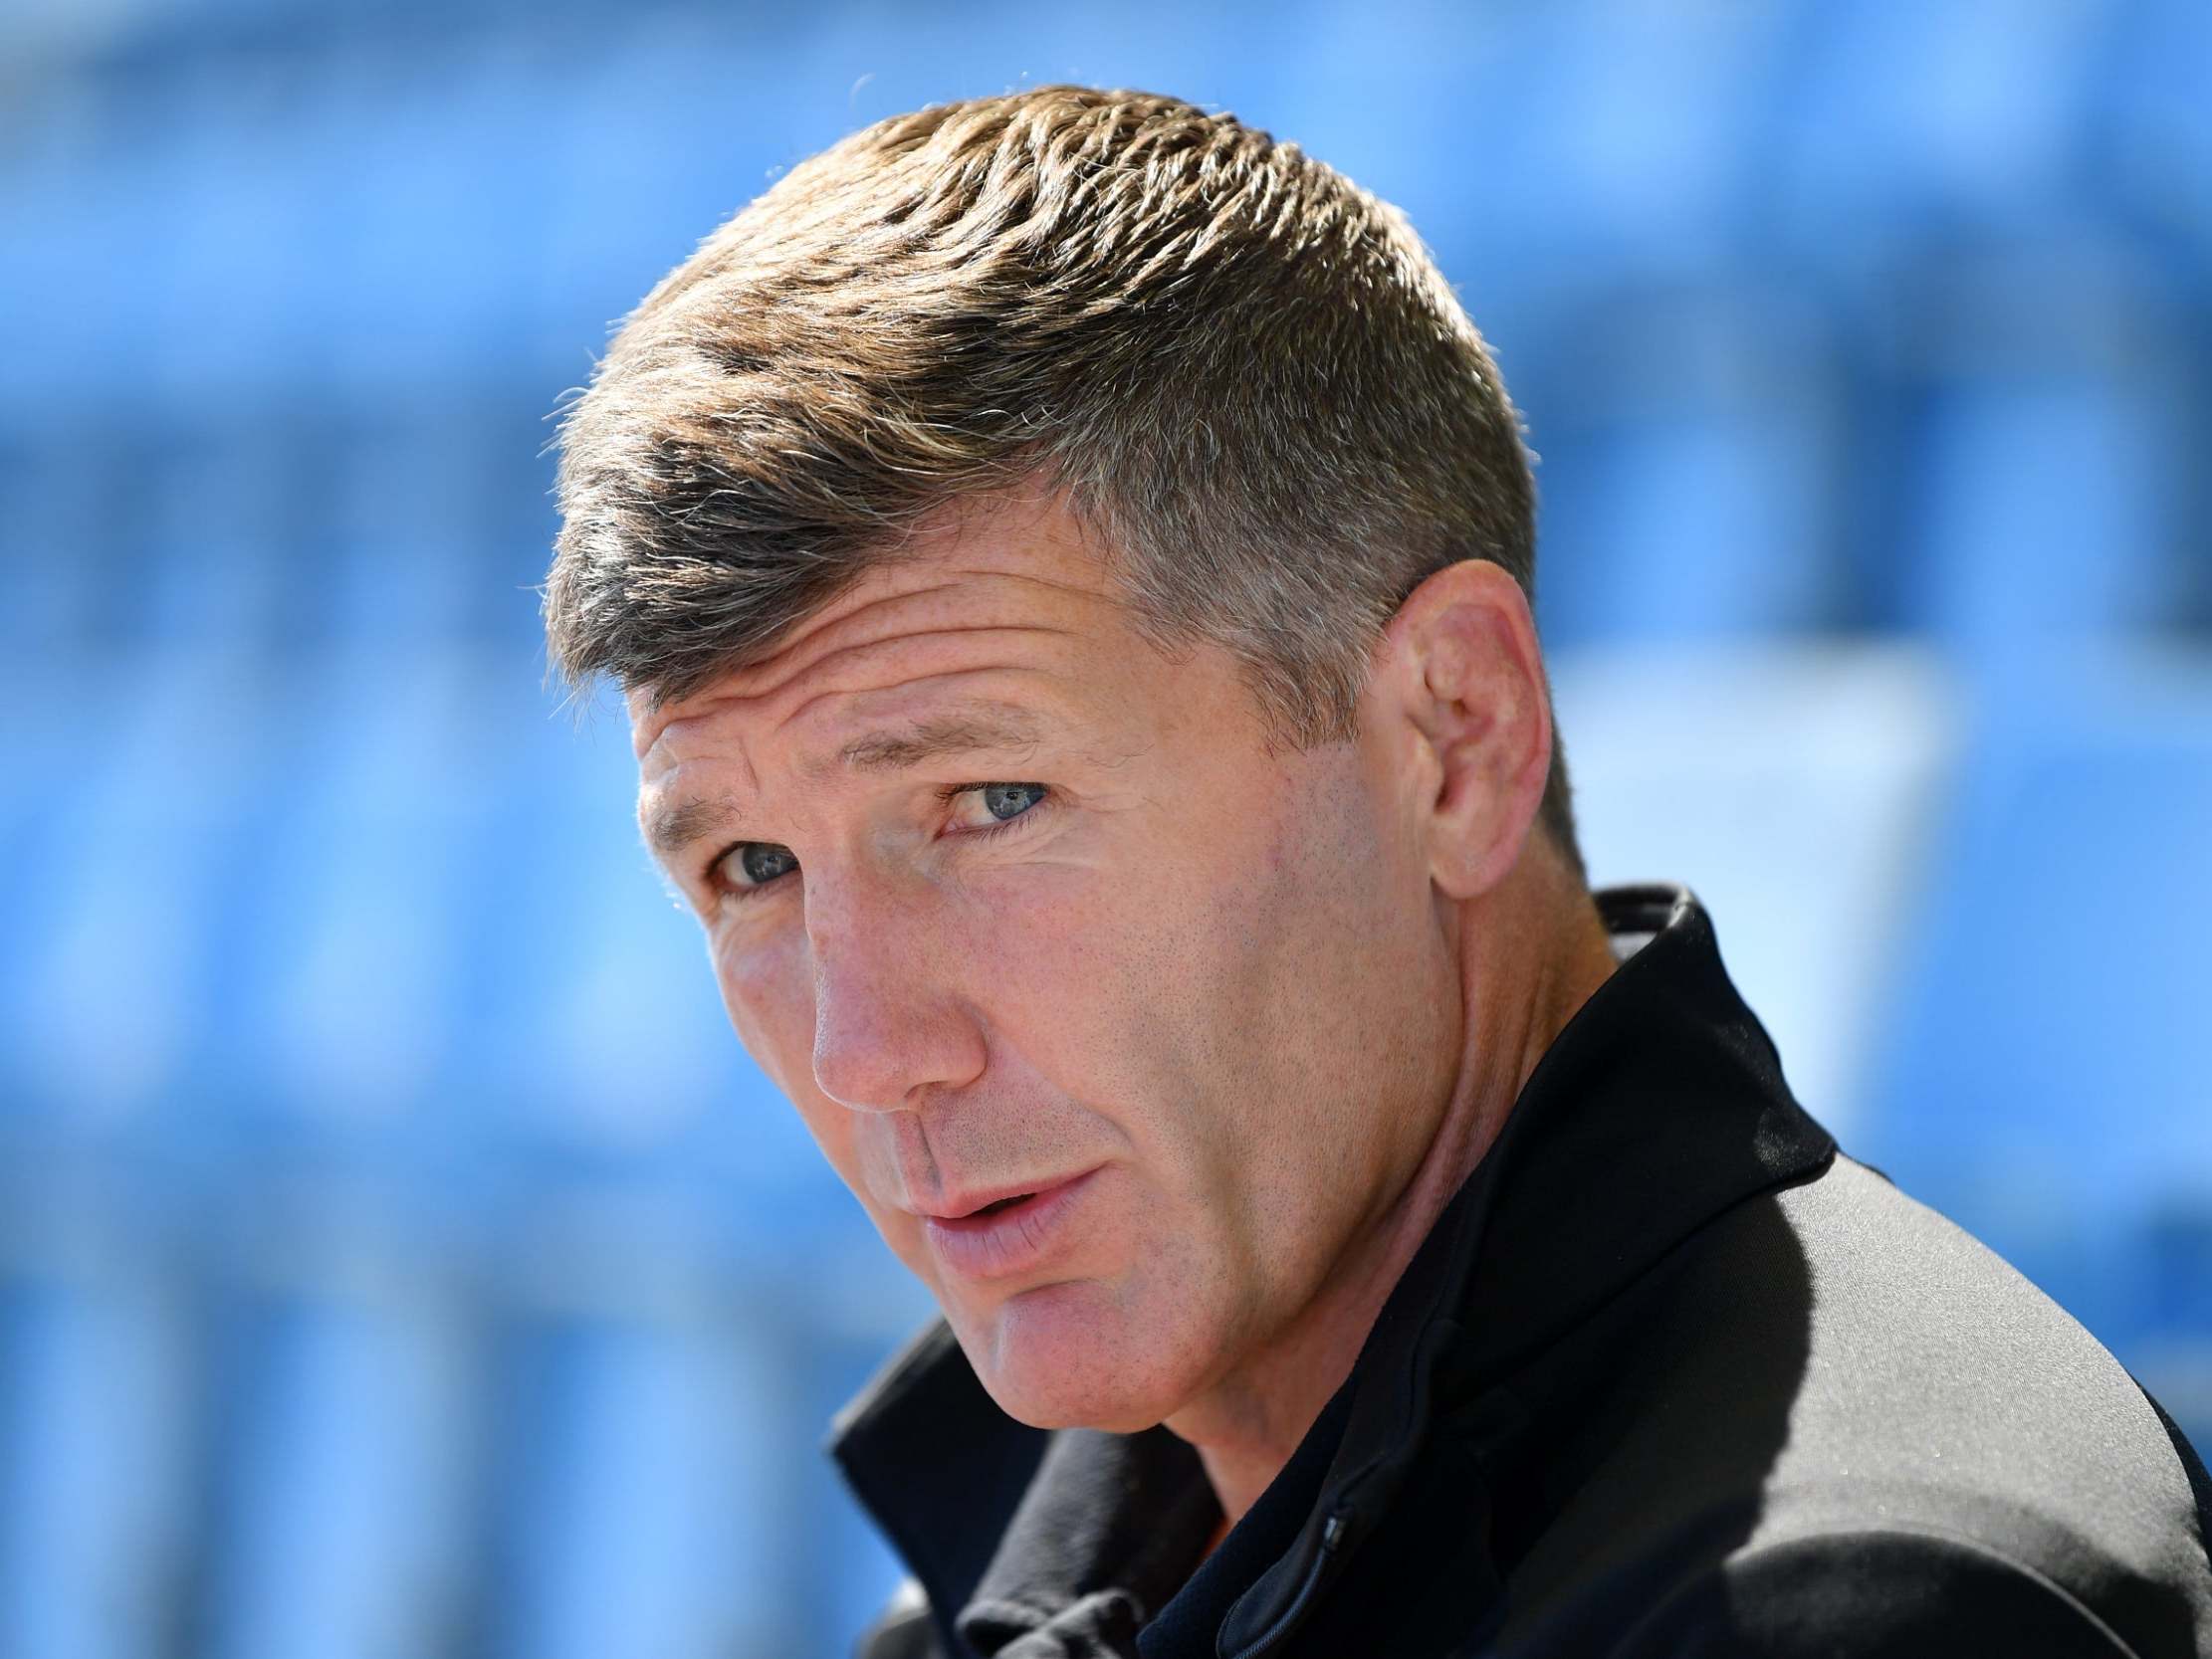 Rob Baxter responded to Boyd's 'boring' jibes after their Premiership semi-final